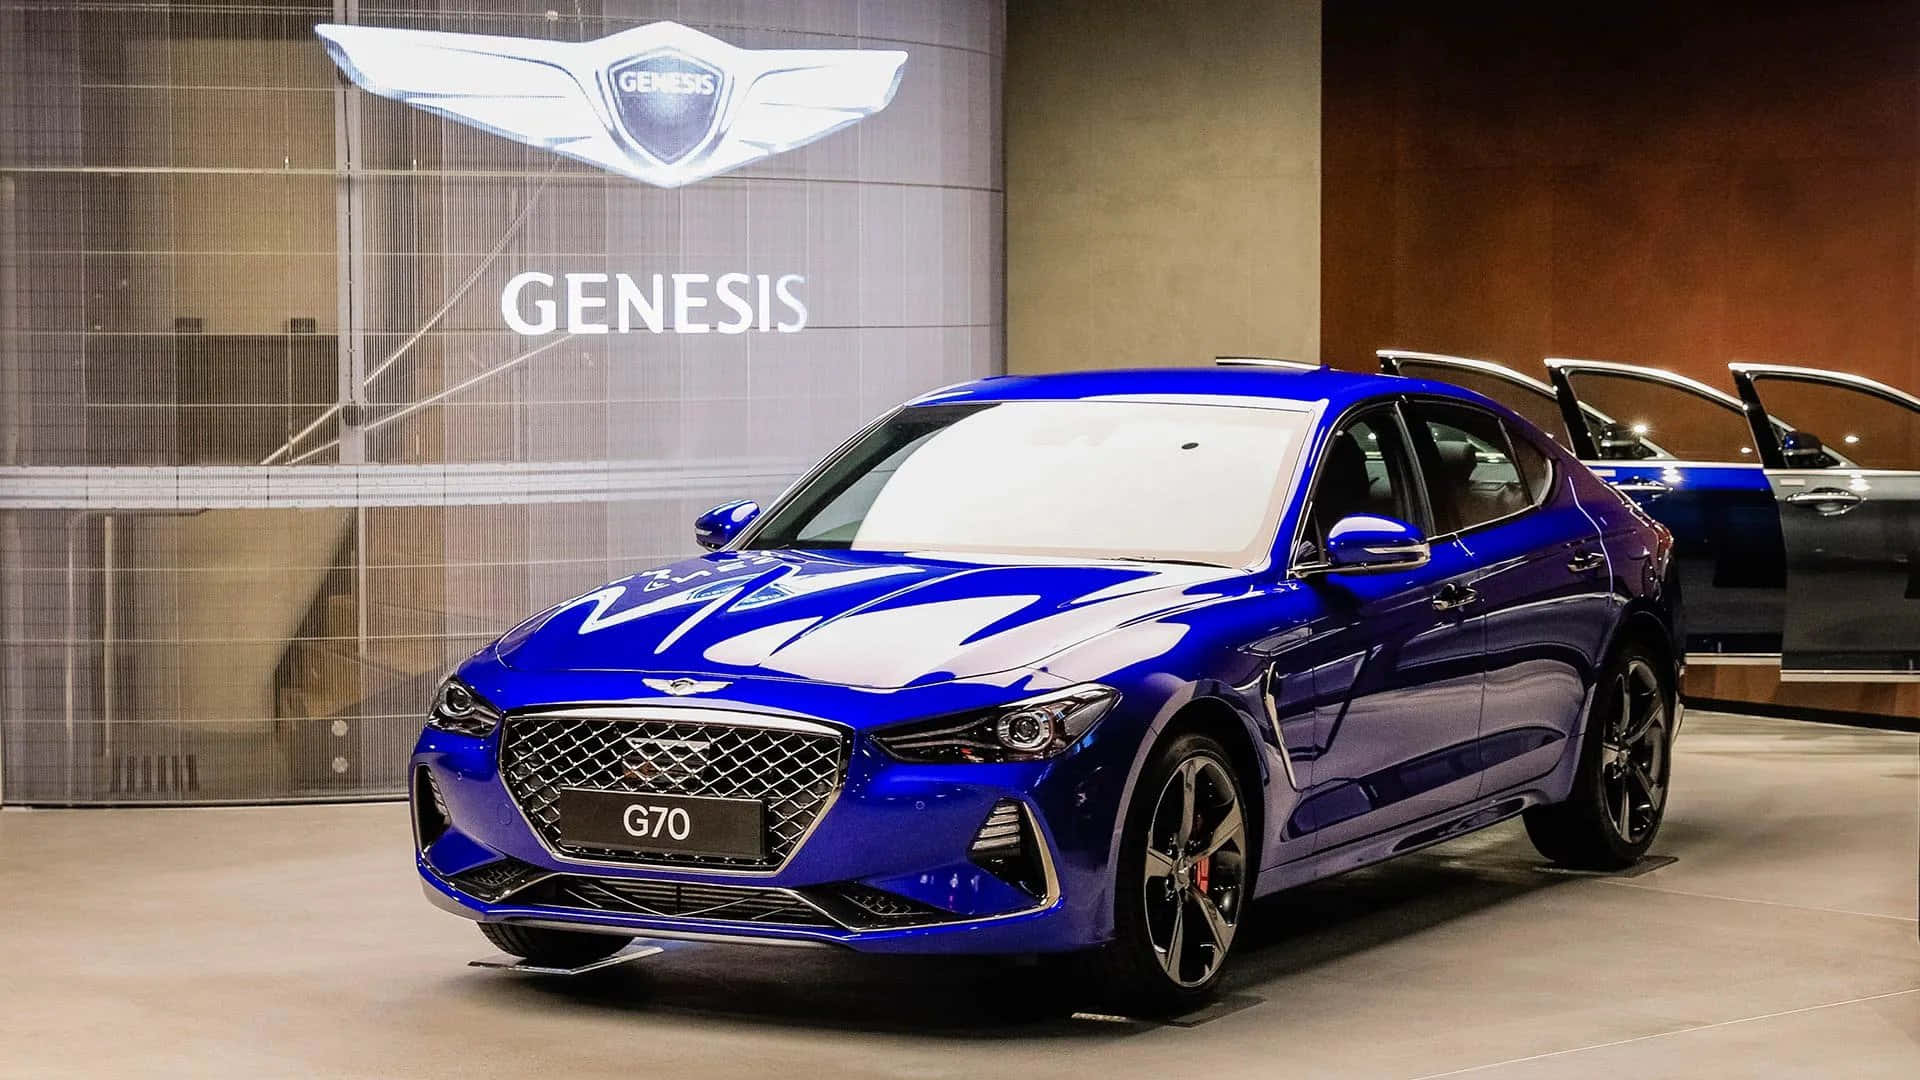 A Blue Genesis Is Parked In A Showroom